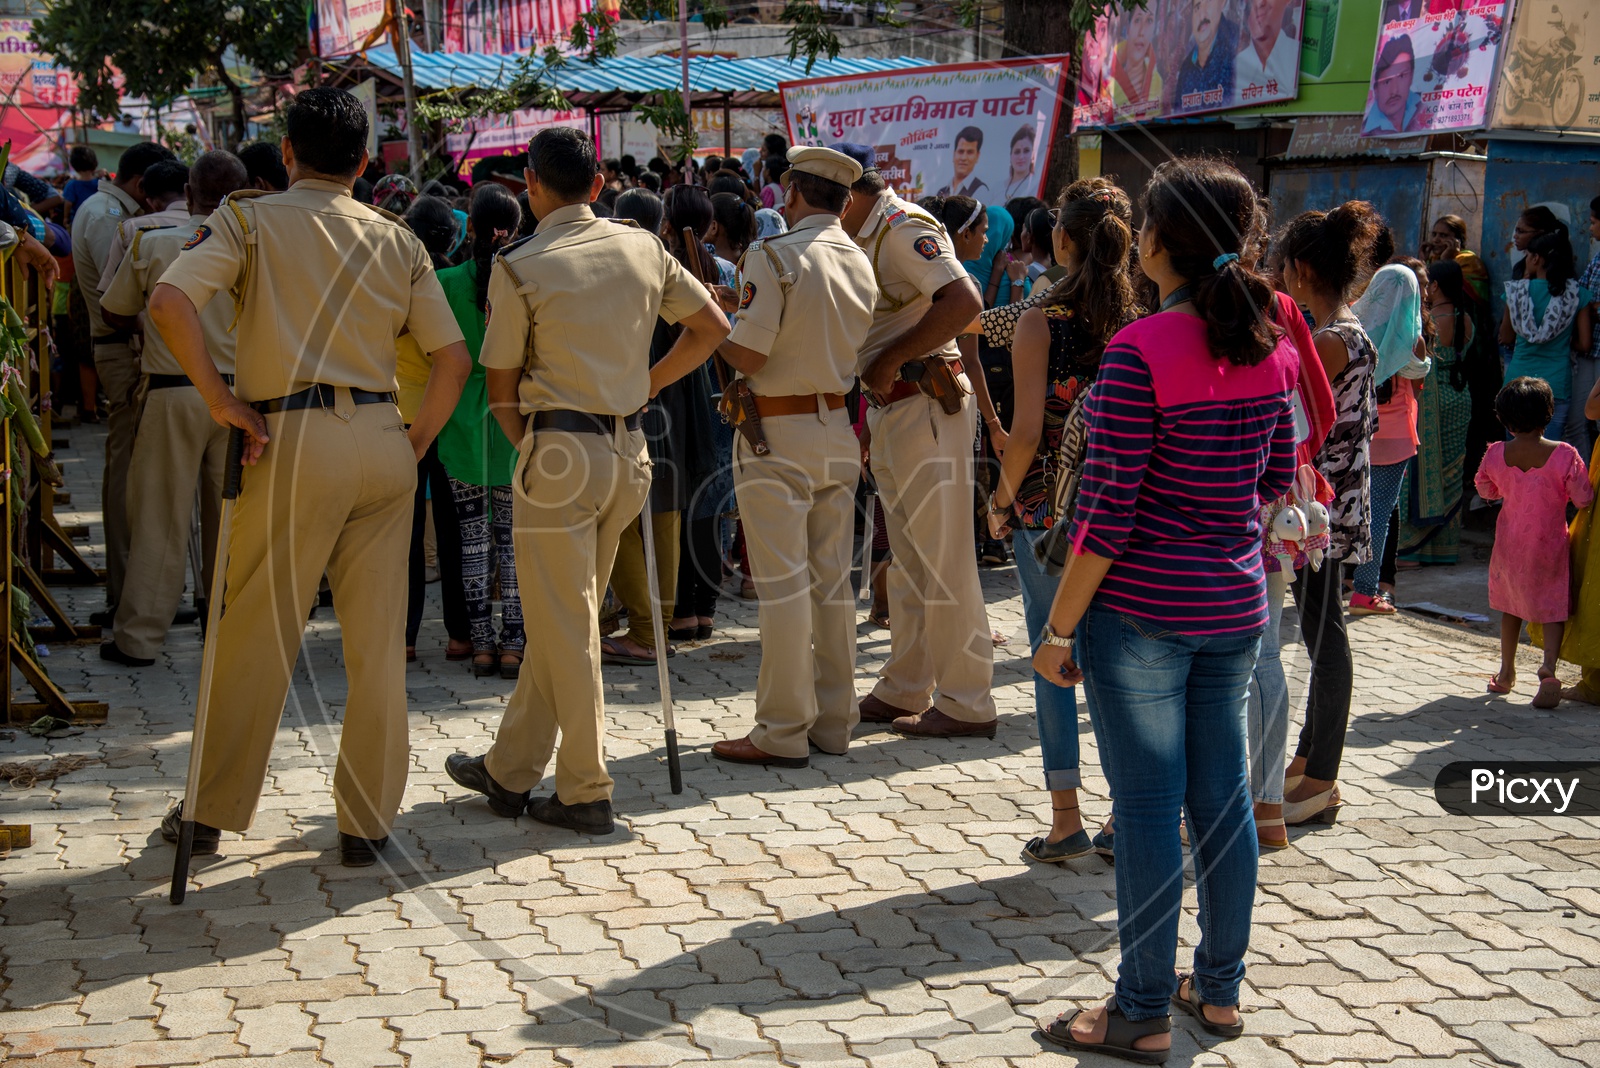 Indian Police Or Security Personnel At Public Events